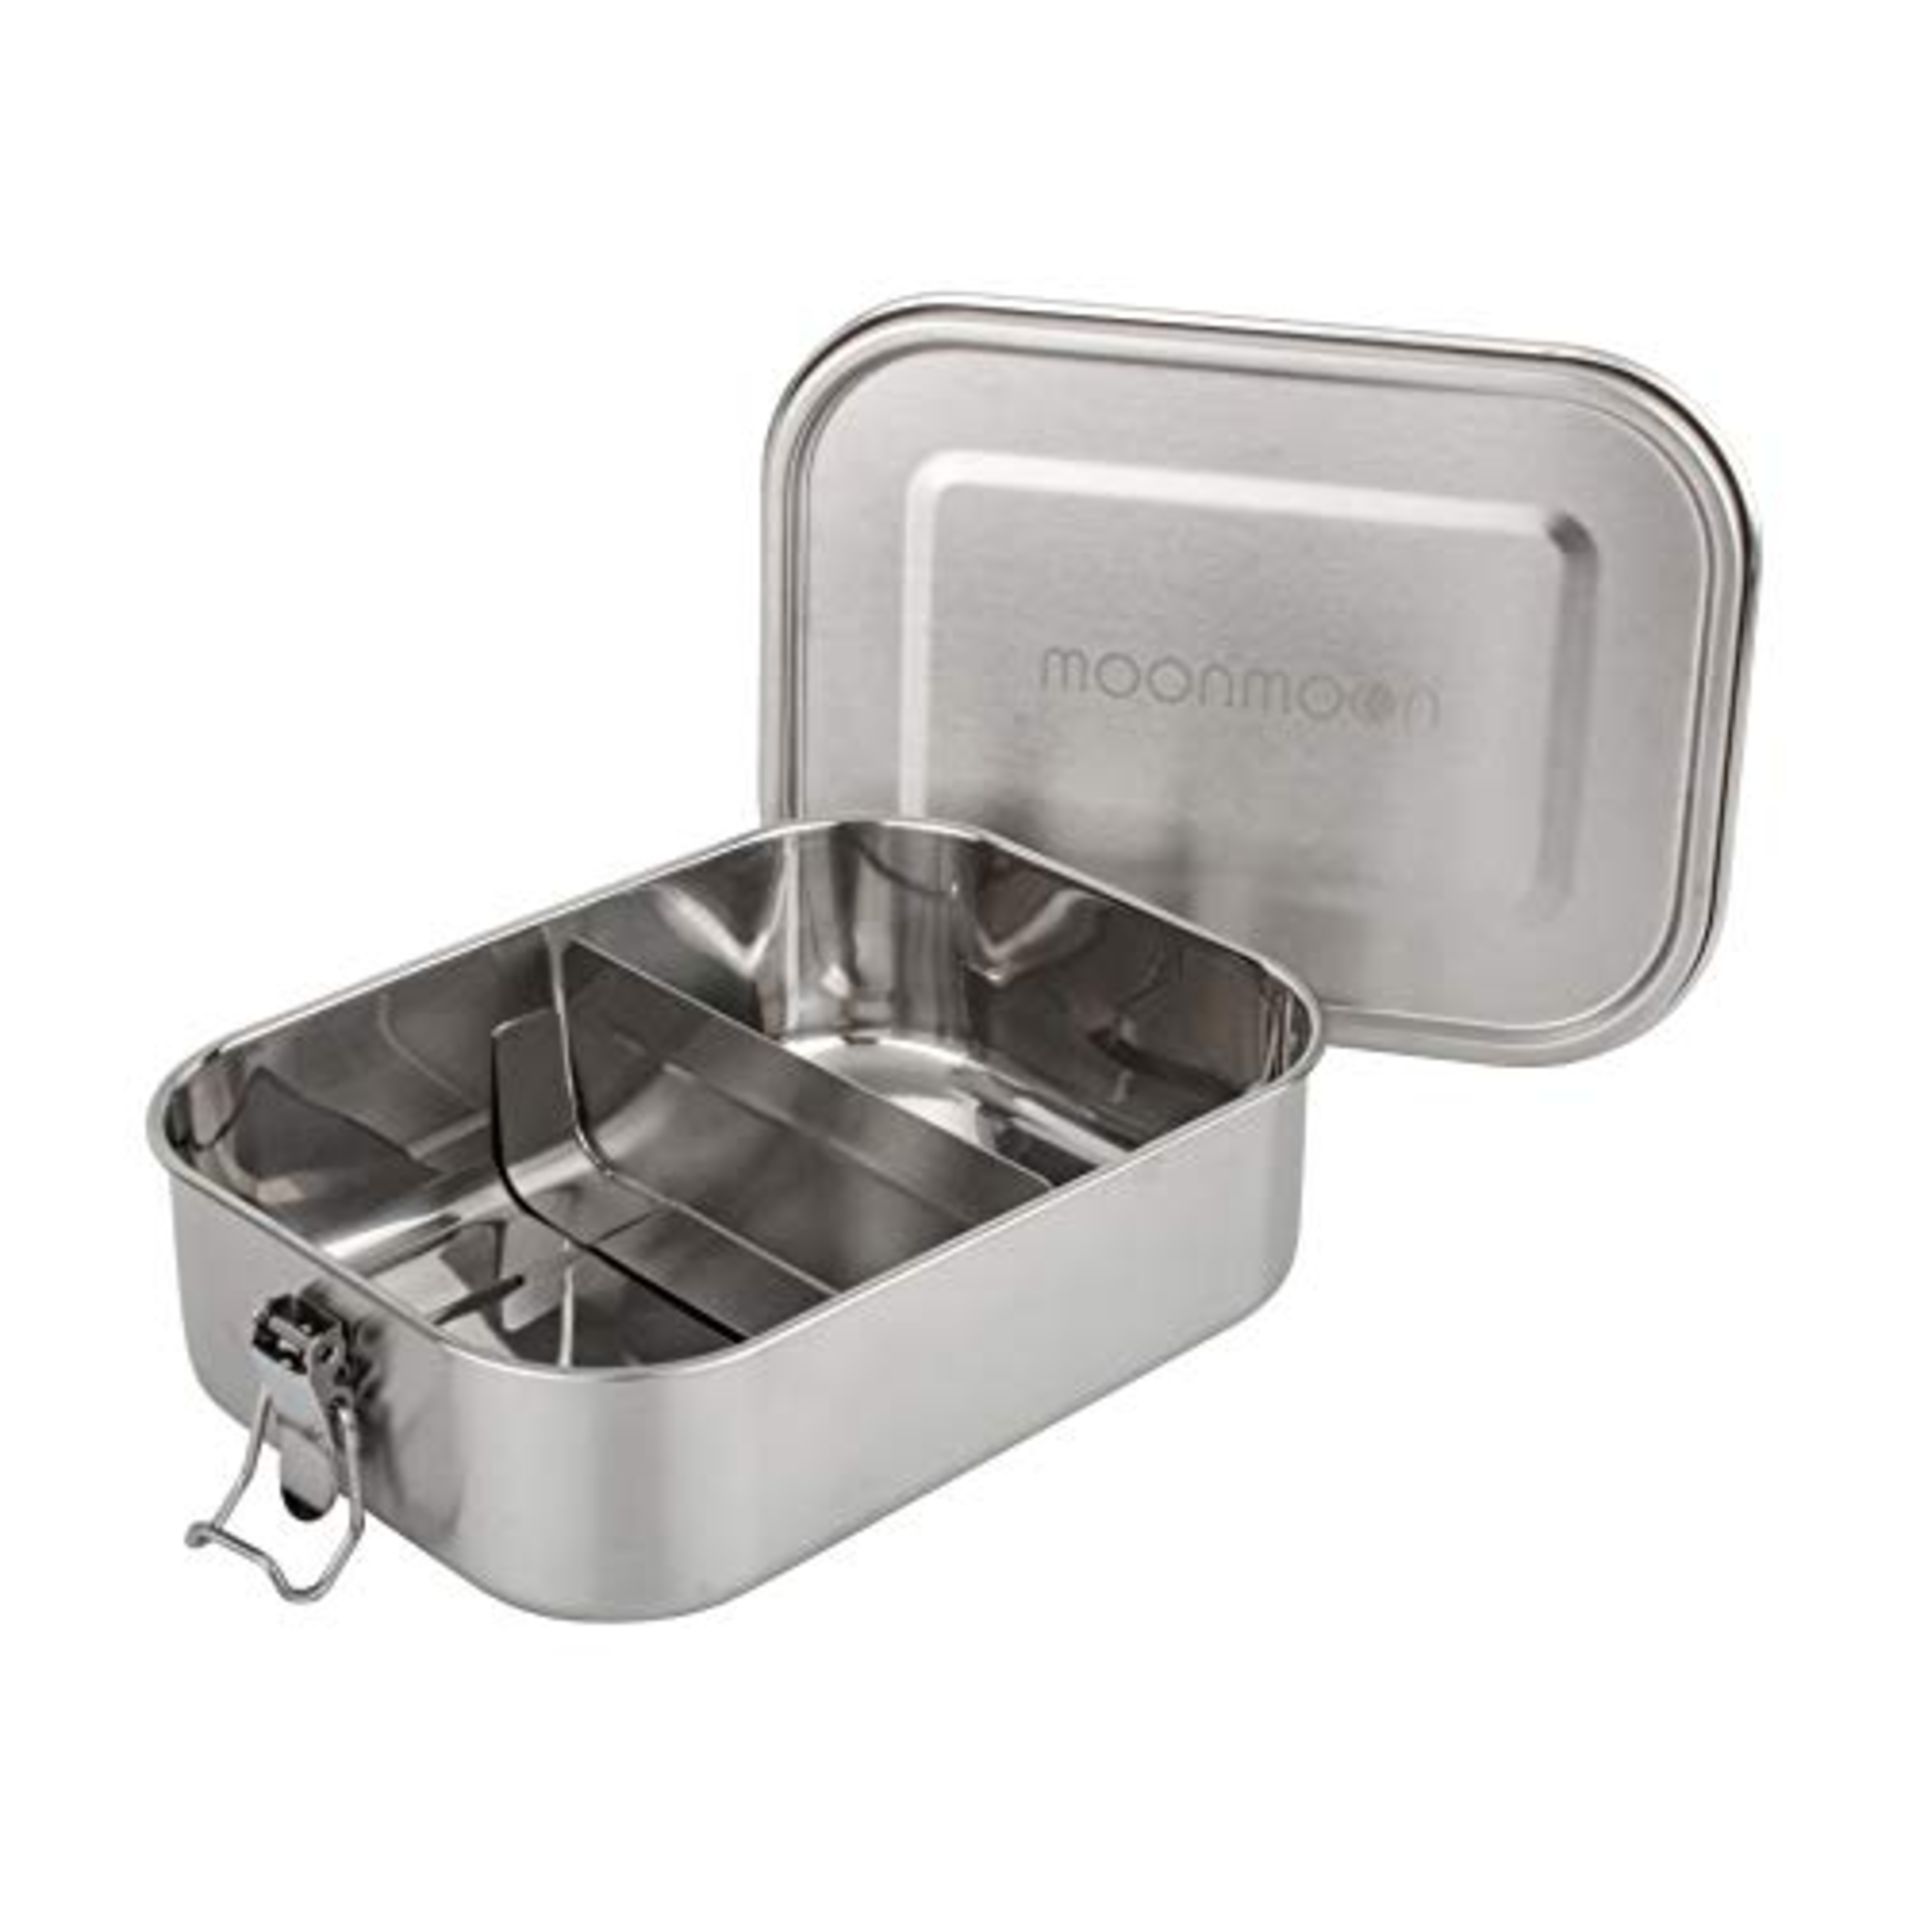 Moonmoon Stainless Steel Lunch Box | Eco-Friendly 1.2 Litre Leakproof Bento Box with c